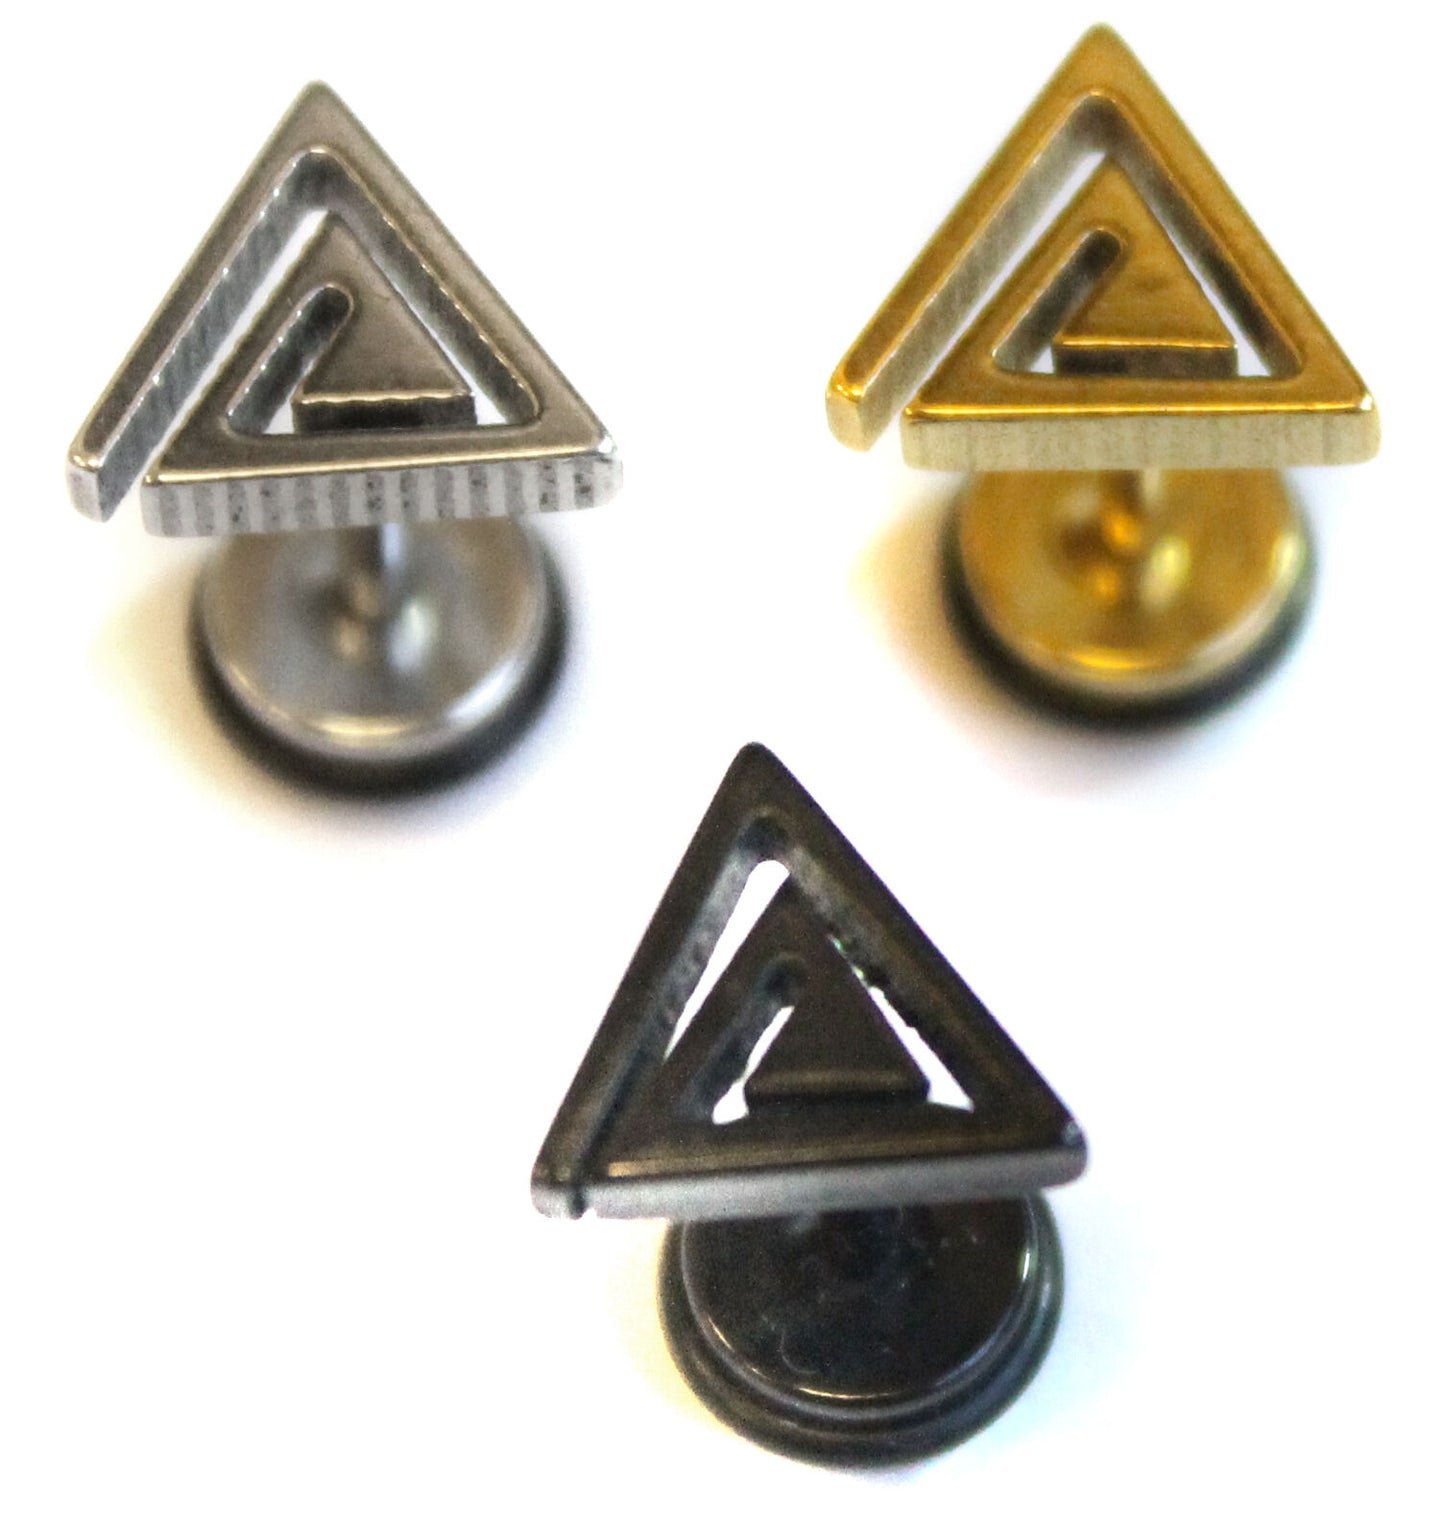 Mens Triangle Spiral Stainless Steel Earrings Plug Faker Stretcher Stud